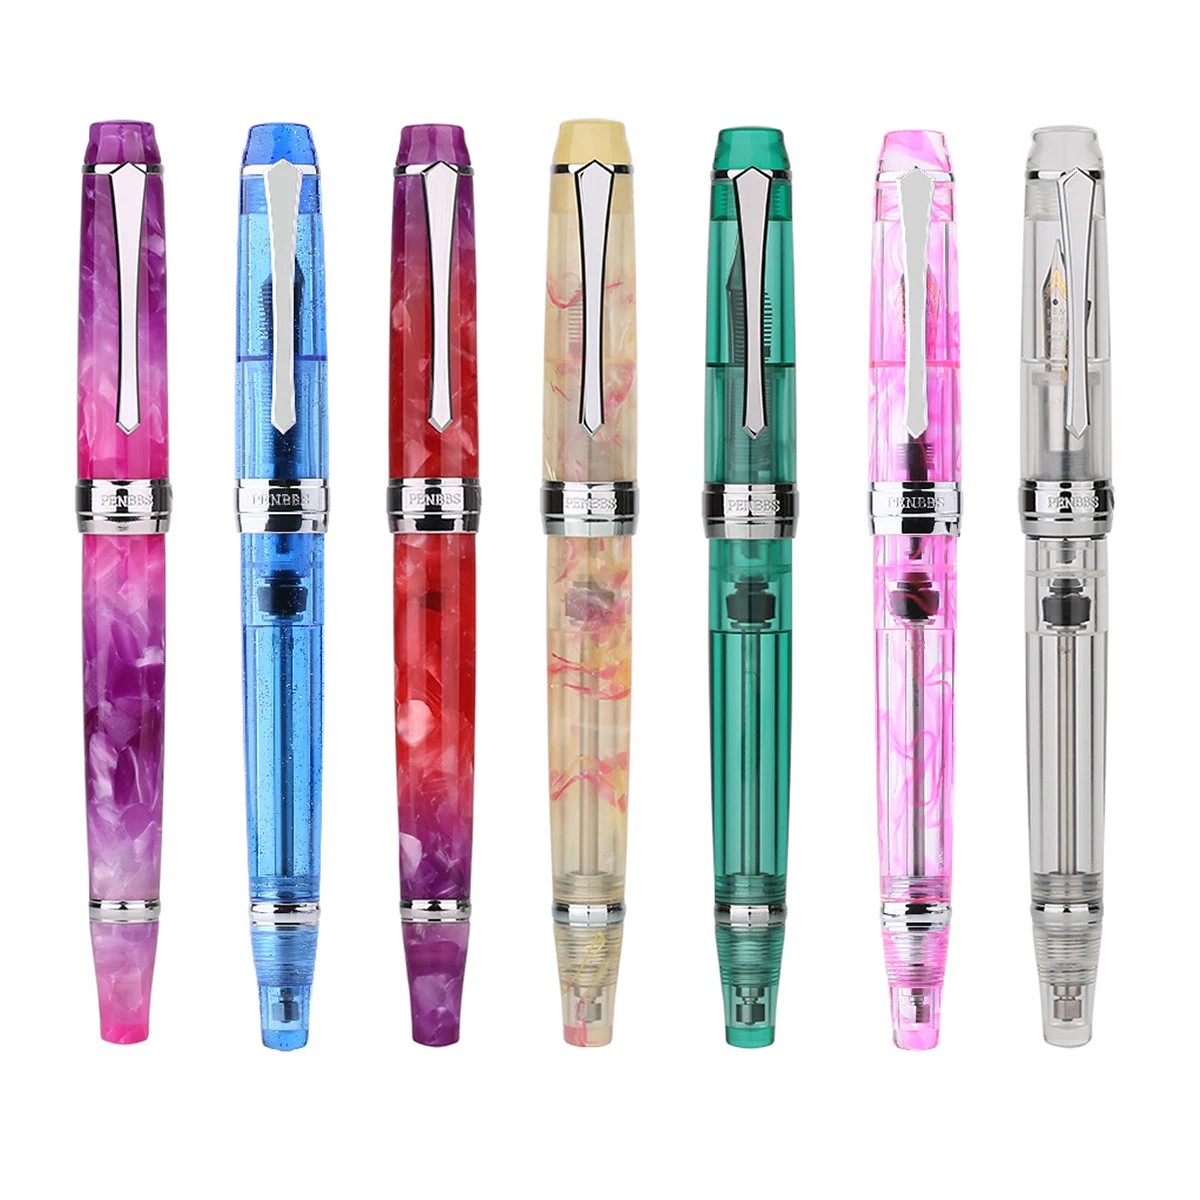 PENBBS 456 Vacuum Filling Fountain Pen EF/F/M Nib, New Color Transparent / Patterns Writing Office Gift Pen with Box Set